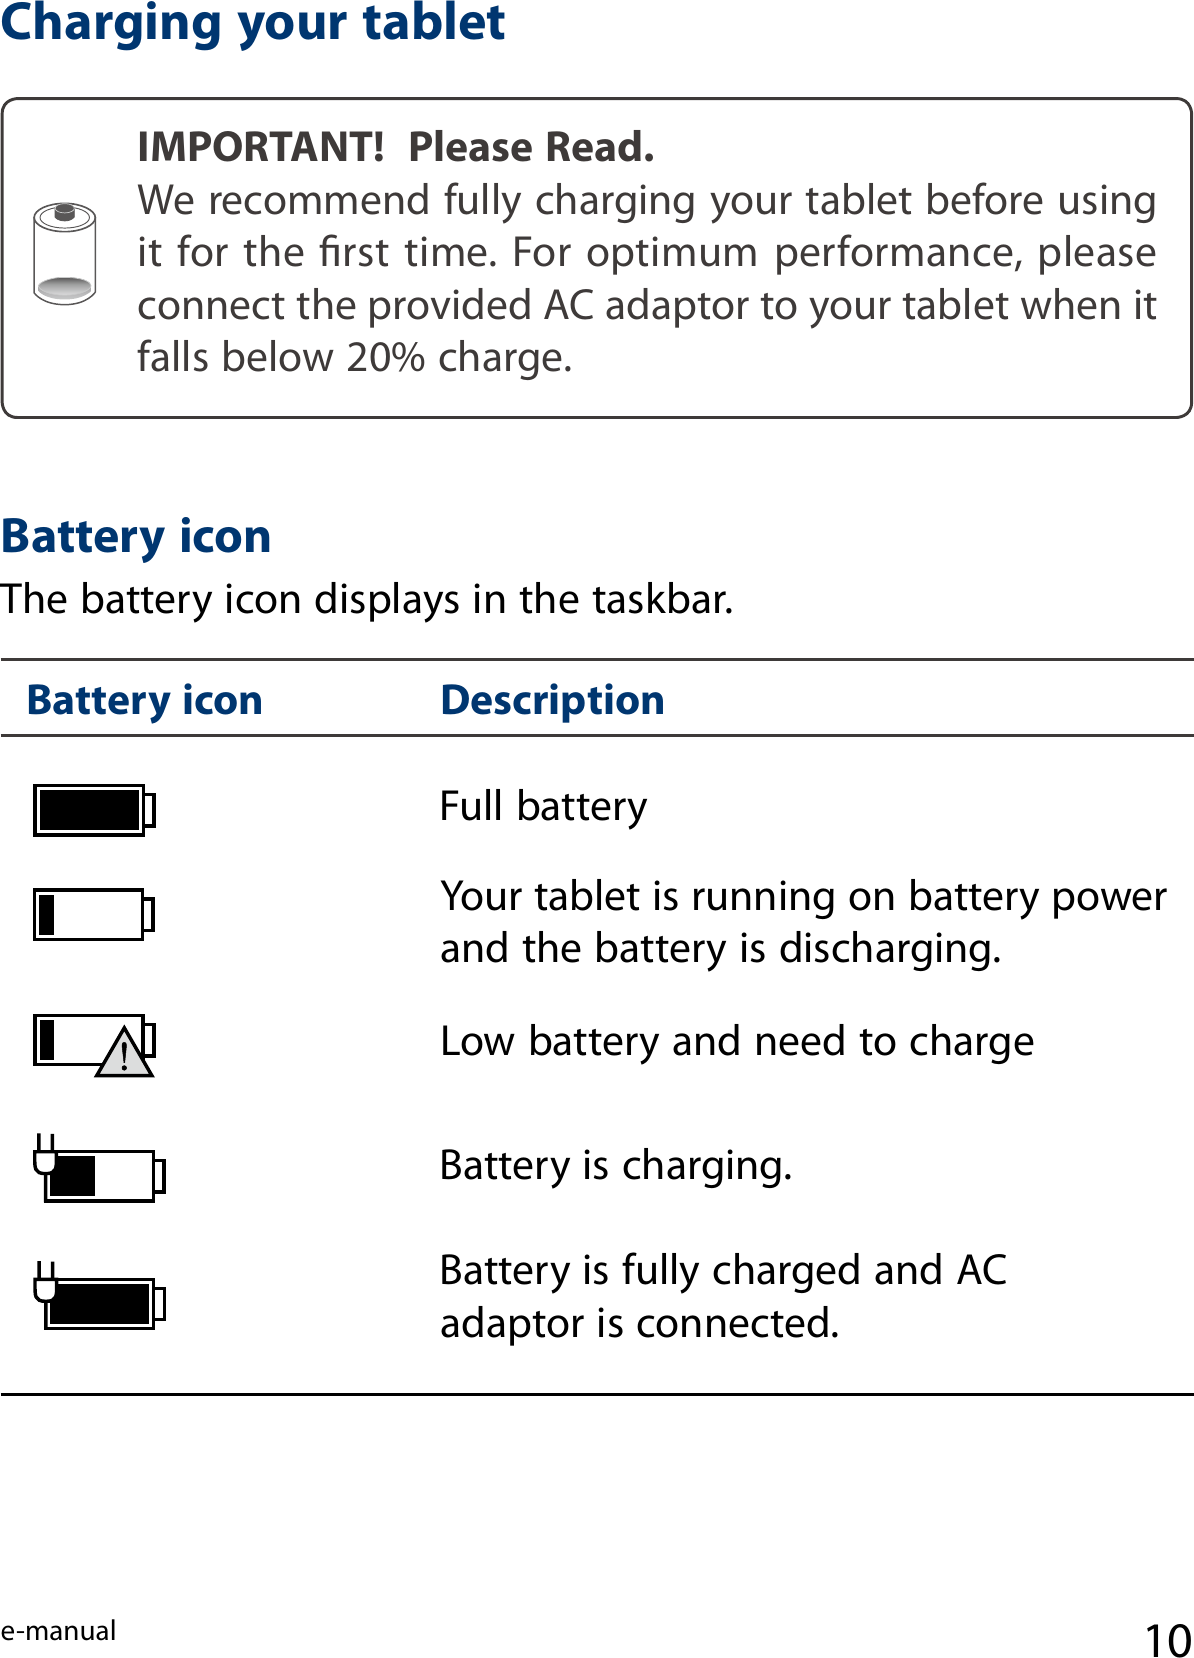 e-manual 10Charging your tabletIMPORTANT!  Please Read.We recommend fully charging your tablet before using it for the  rst  time. For optimum performance, please connect the provided AC adaptor to your tablet when it falls below 20% charge.Full battery Low battery and need to charge Your tablet is running on battery power and the battery is discharging.Battery is charging.Battery is fully charged and AC adaptor is connected.Battery icon Description Battery iconThe battery icon displays in the taskbar.